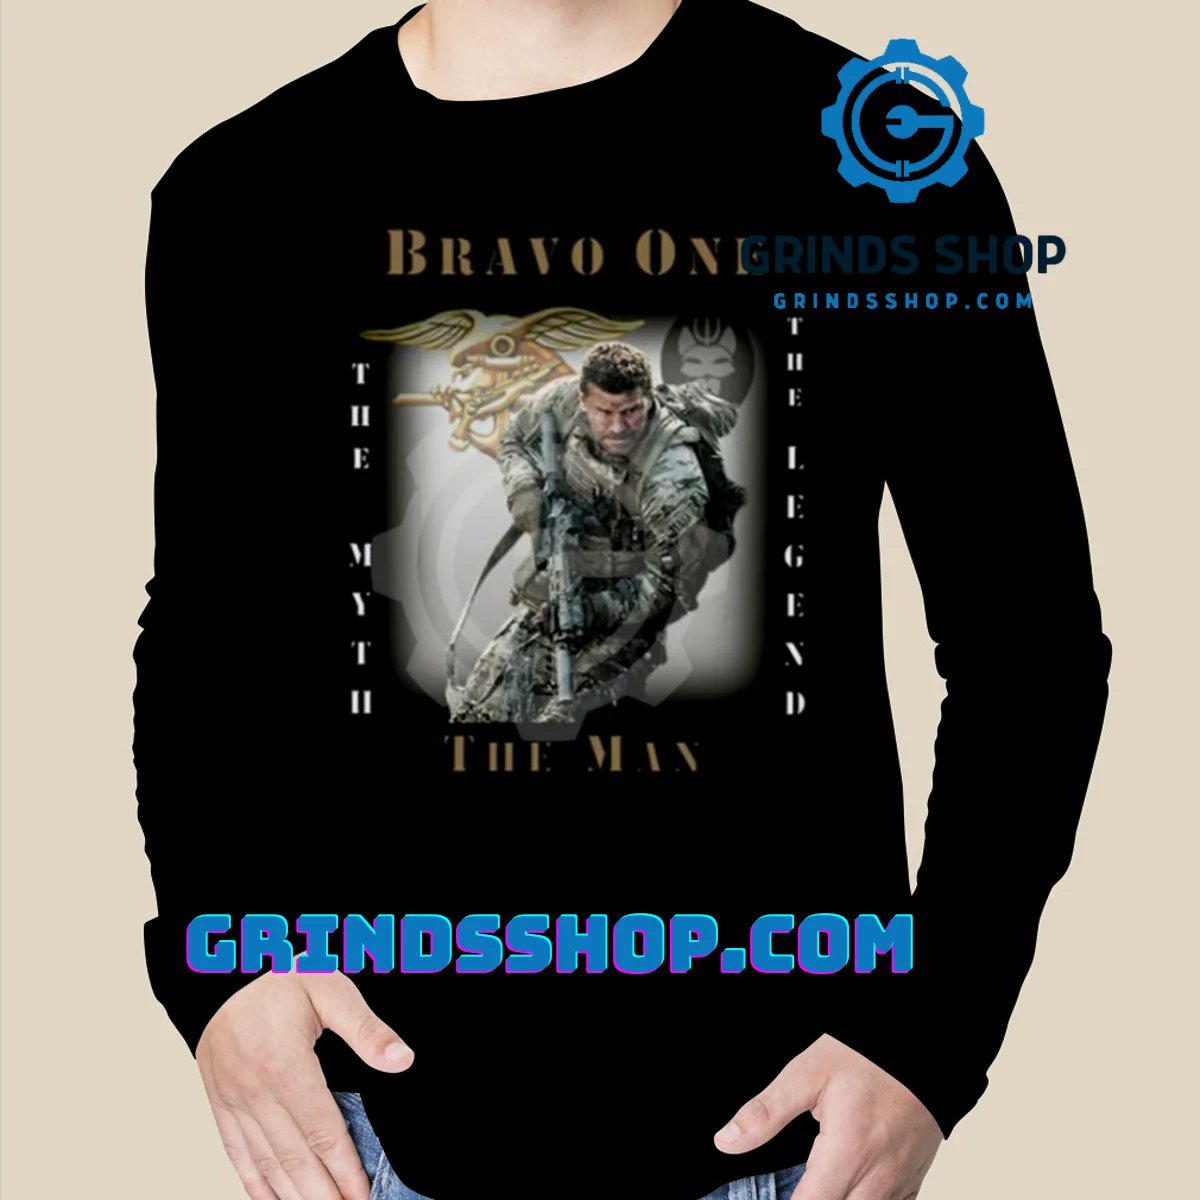 Seal Team Bravo Legend shirt From: 18.99
Buy it here: grindsshop.com/product/seal-t…

#SealTeamBravo
#LegendShirt
#MilitaryFashion
#SpecialForces
#MilitaryApparel
#TacticalStyle
#MilitaryMerchandise
#SealTeamFashion
#BravoTeam
#SpecialOperations
#MilitaryPride
...